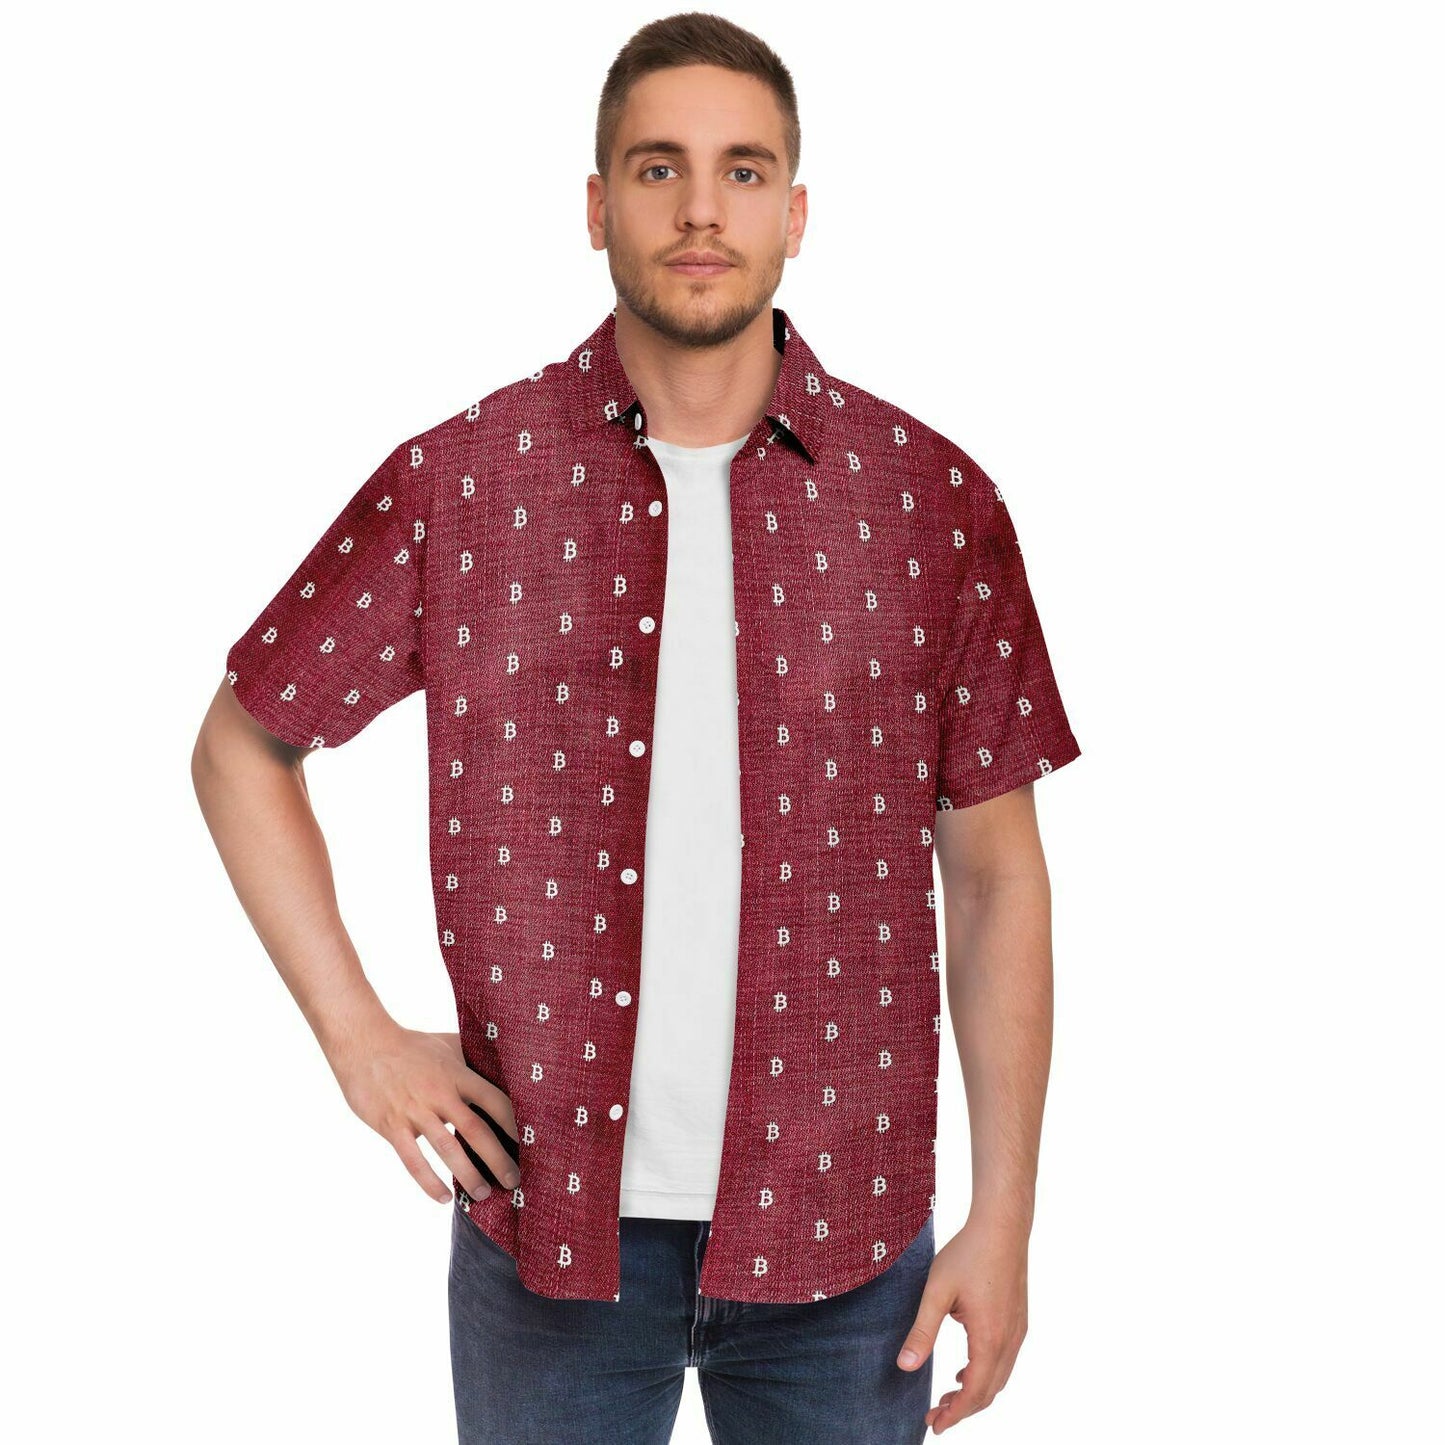 Bitcoin Jeans Red Shirt